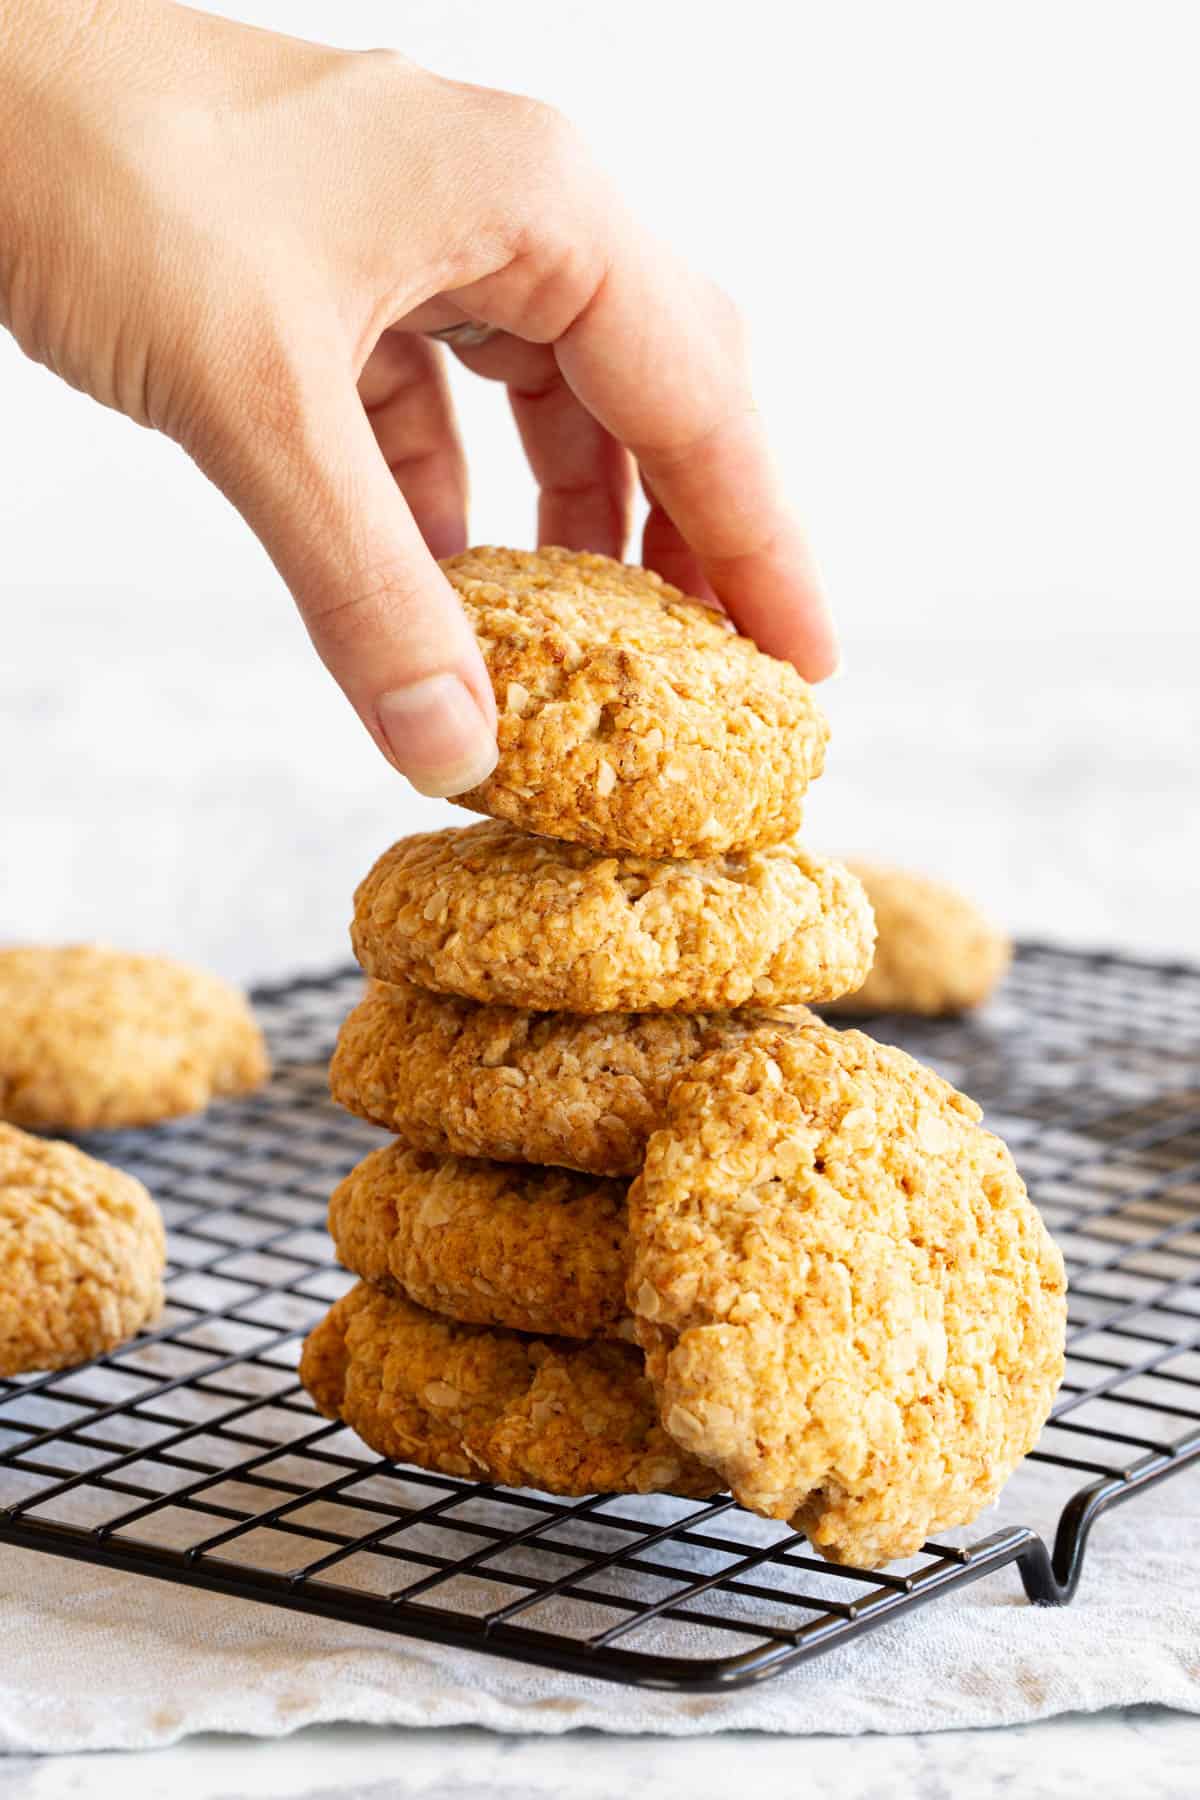 A stack of Anzac biscuits on a tray. A hand is placing a final biscuit on top.